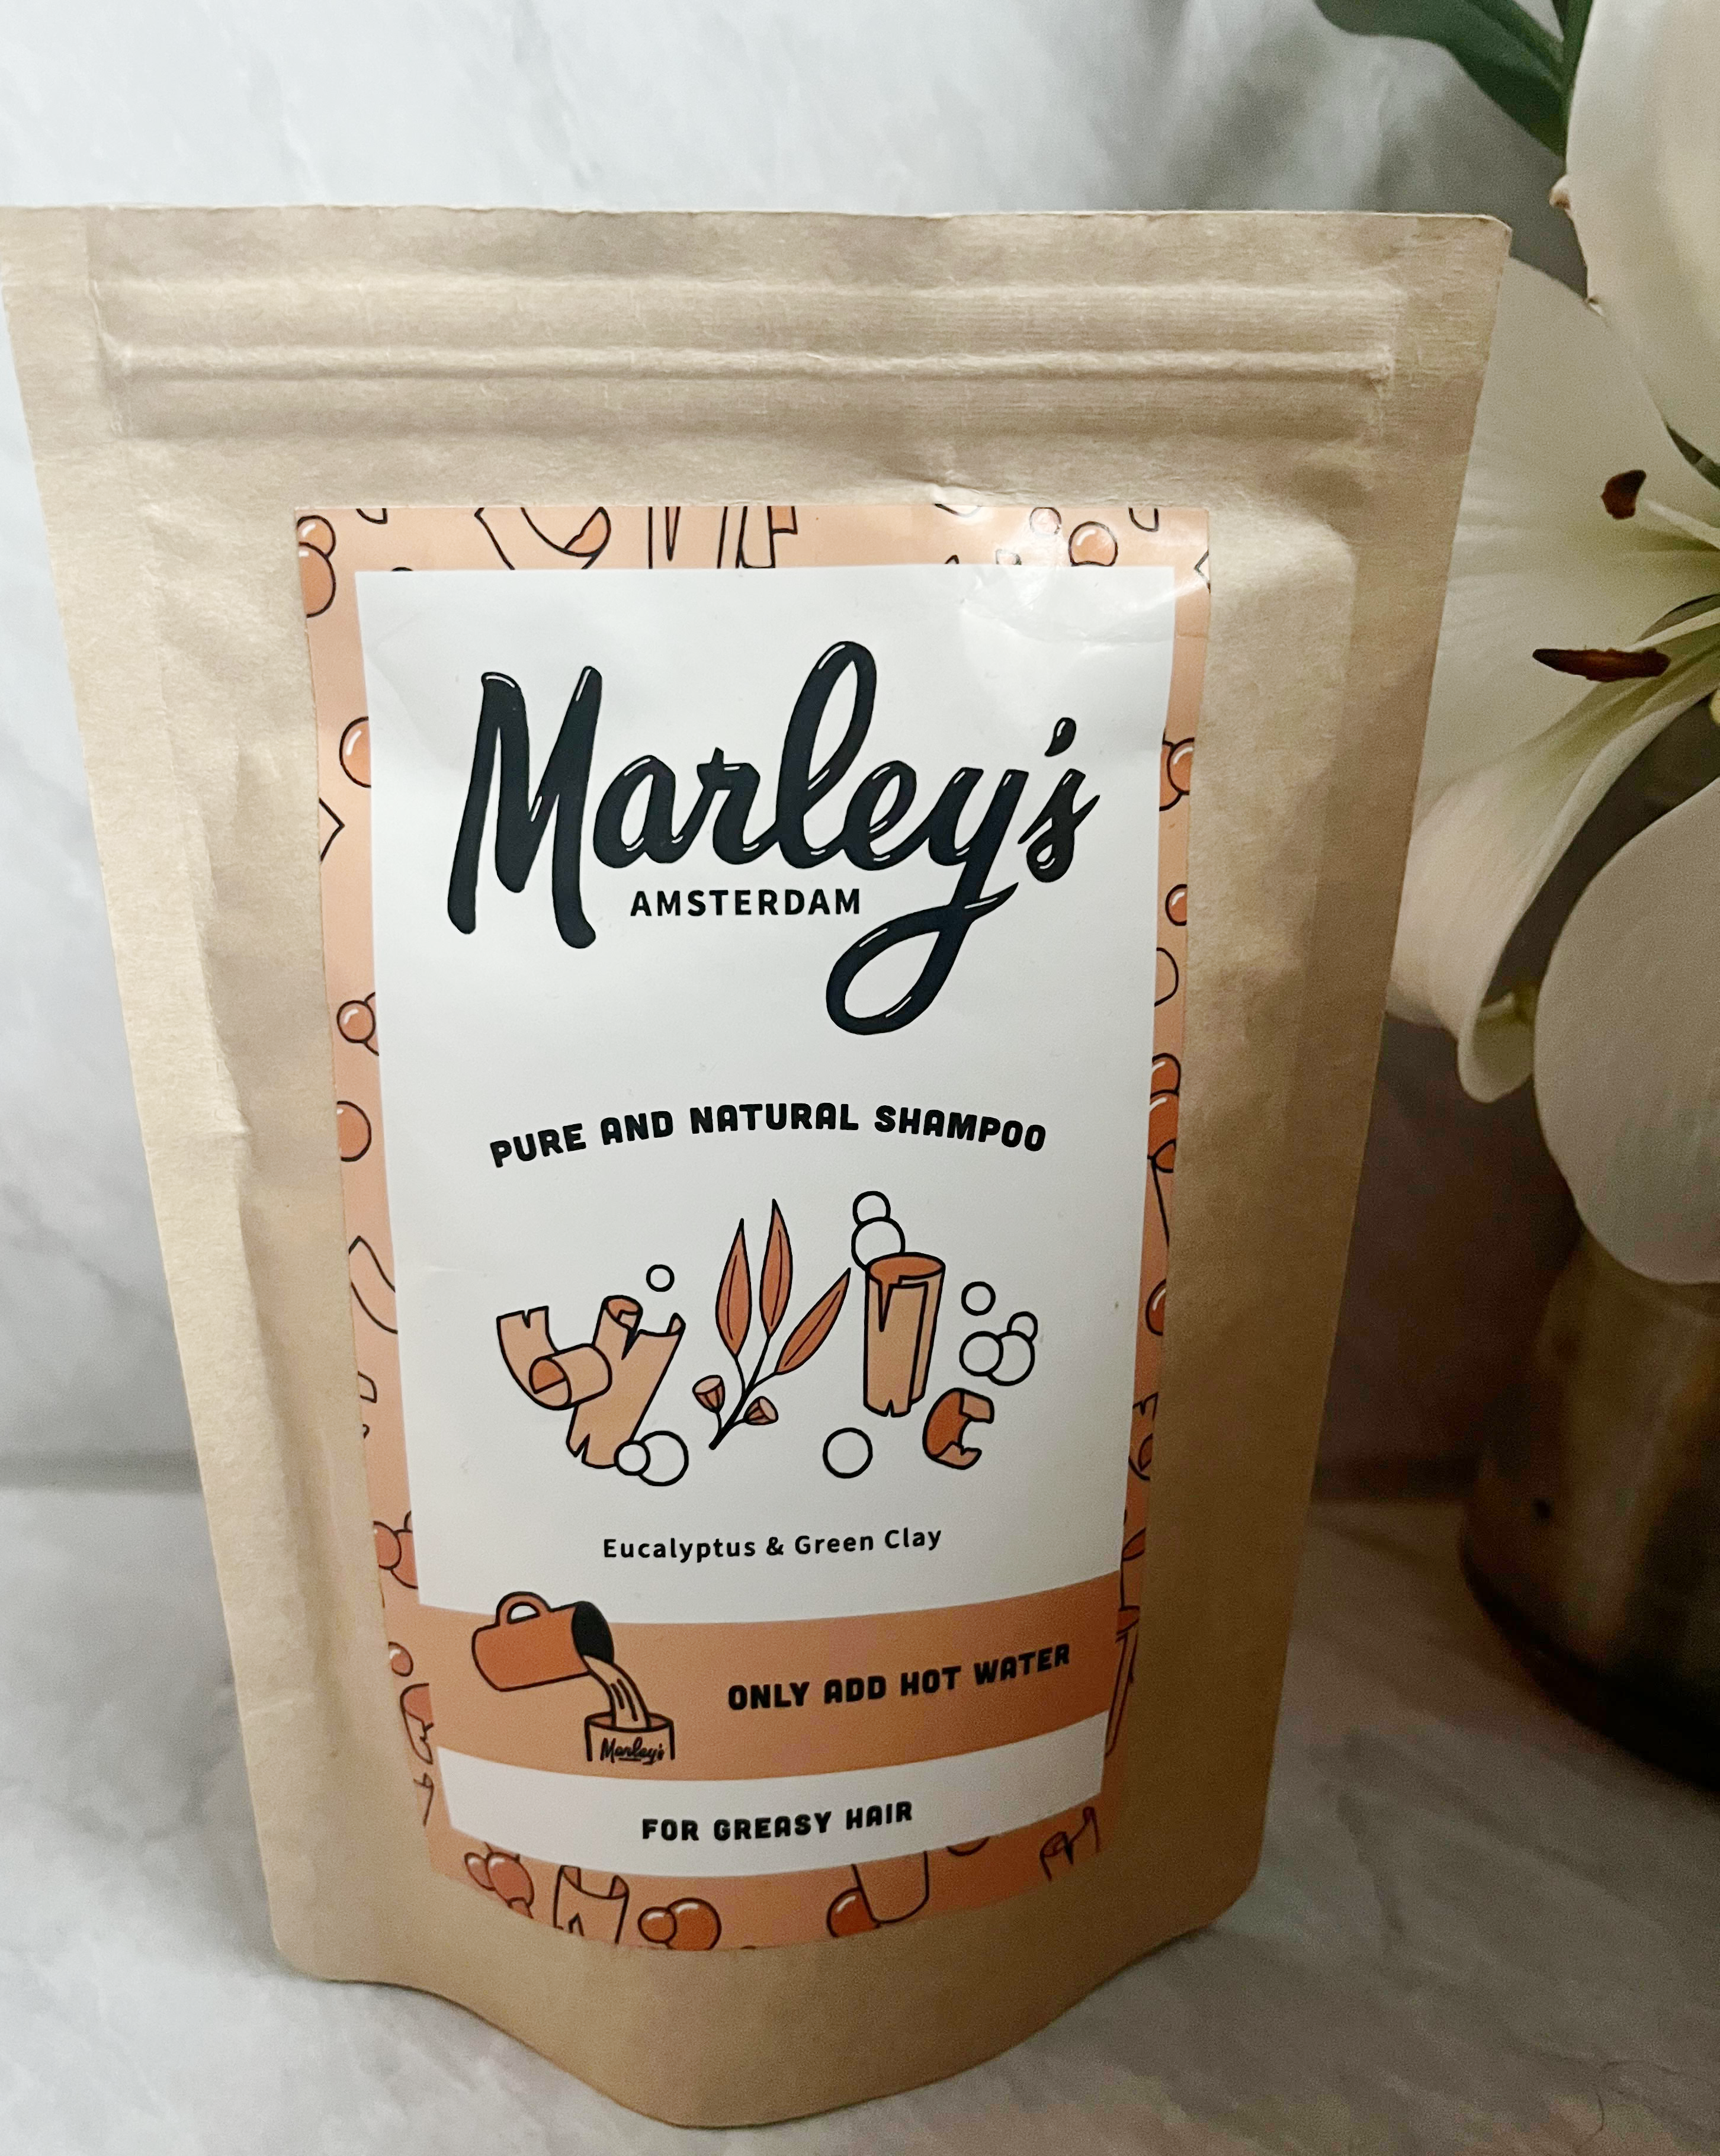 Marley's Pure & Natural Shampoo with Eucalyptus & Green Clay